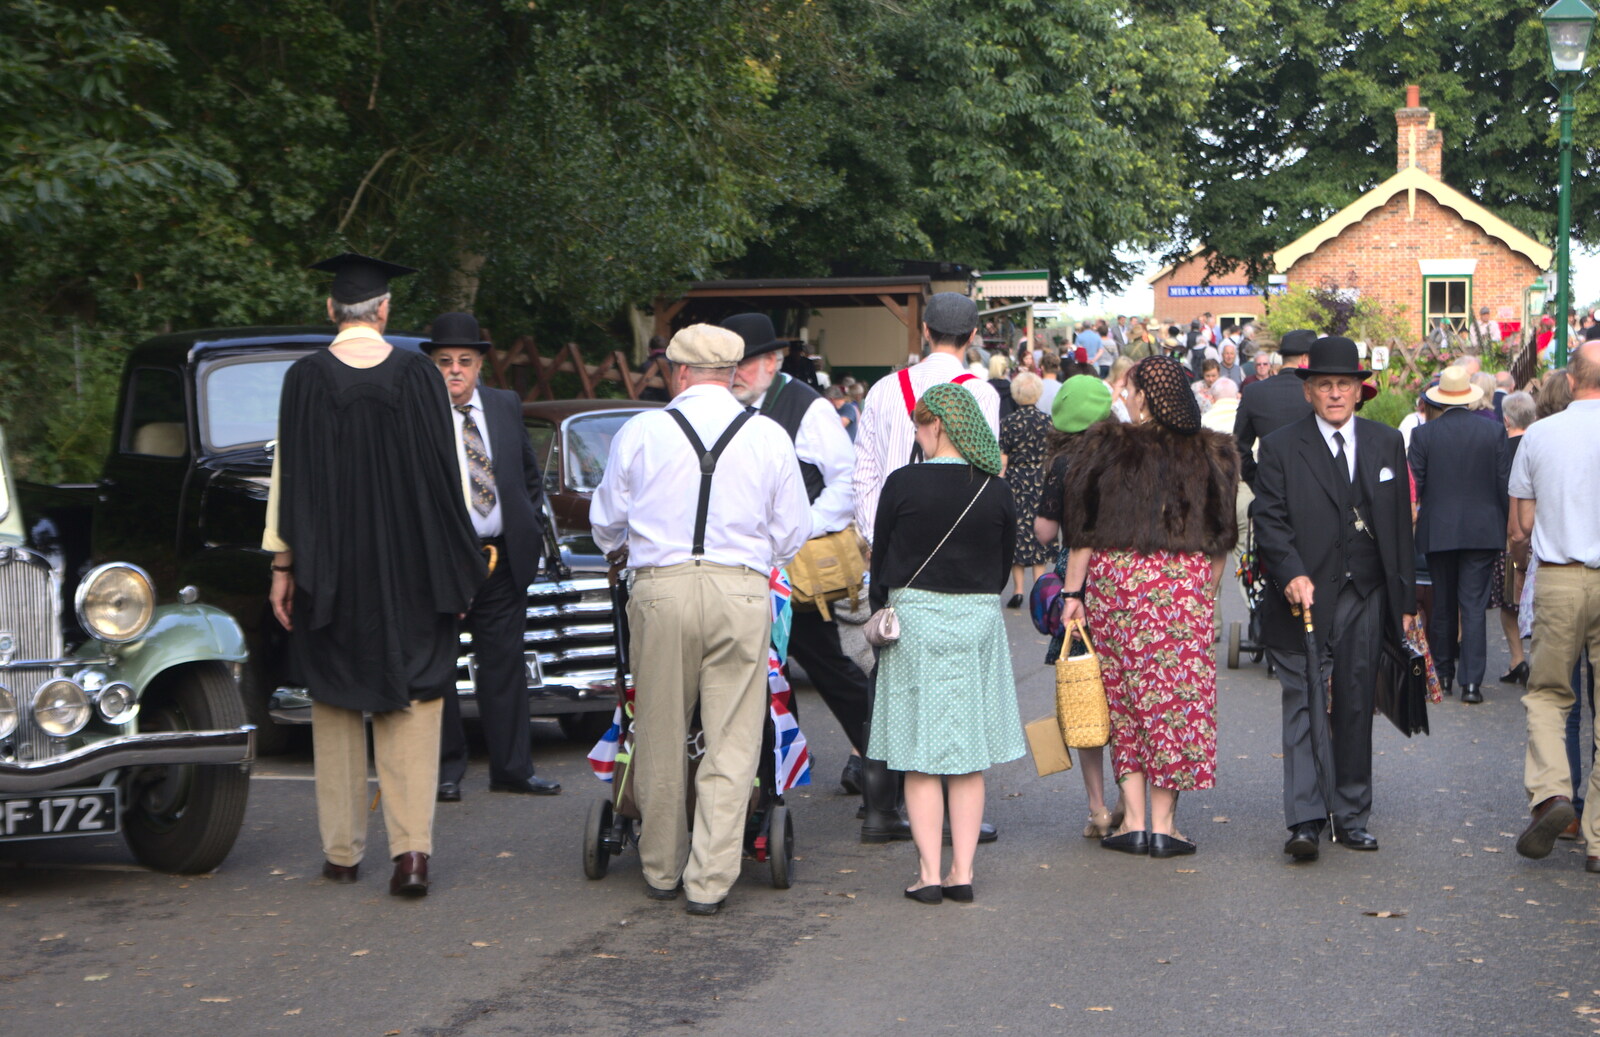 The scene down at Holt station from A Steamy 1940s Day Out, Holt and Sheringham, Norfolk - 20th September 2015